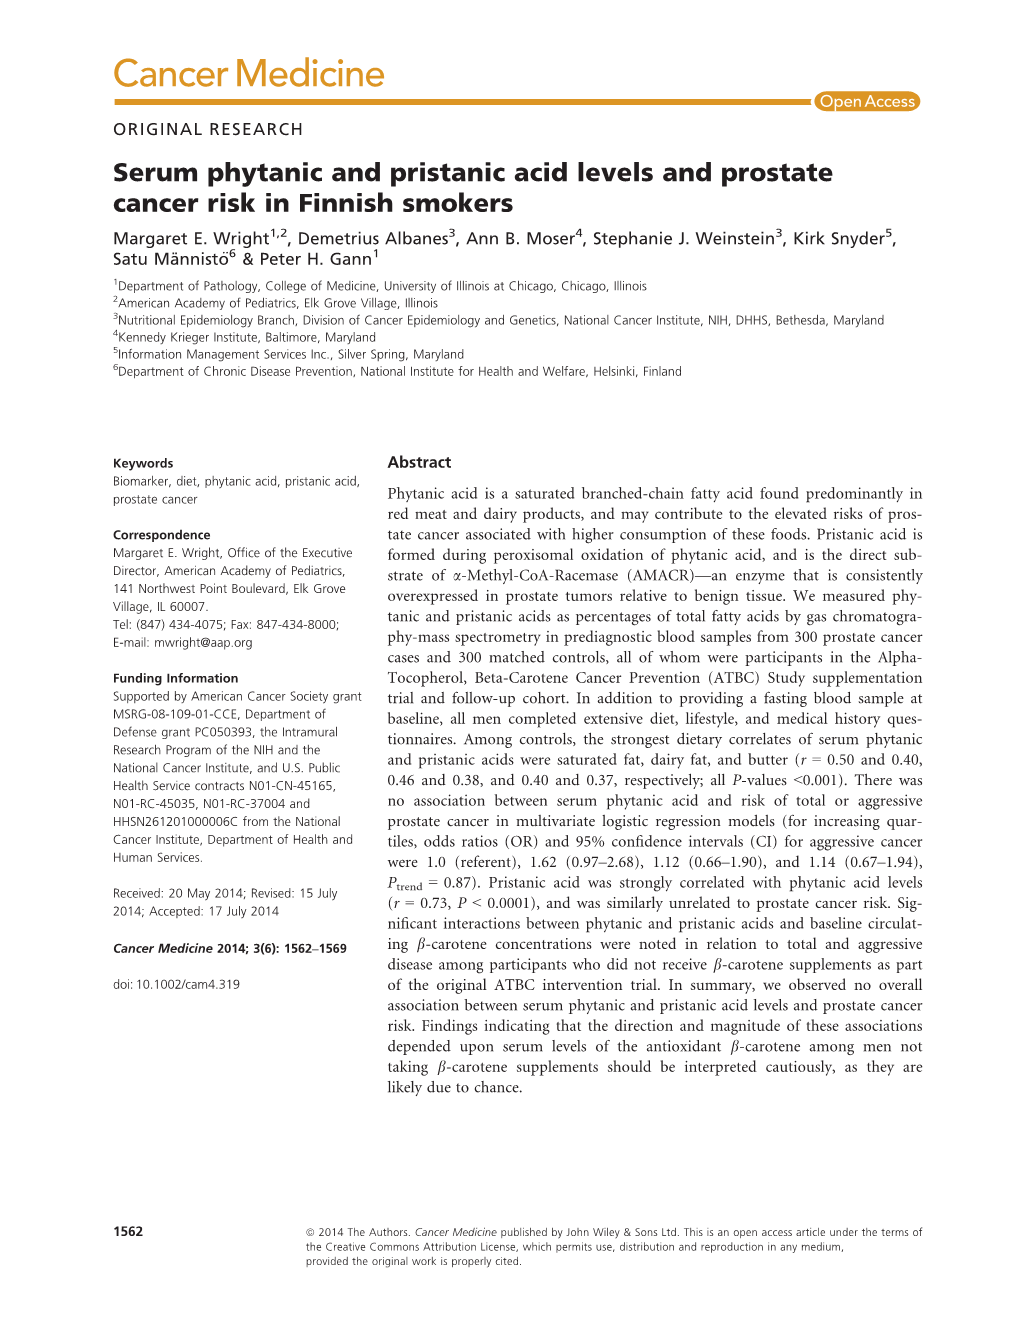 Serum Phytanic and Pristanic Acid Levels and Prostate Cancer Risk in Finnish Smokers